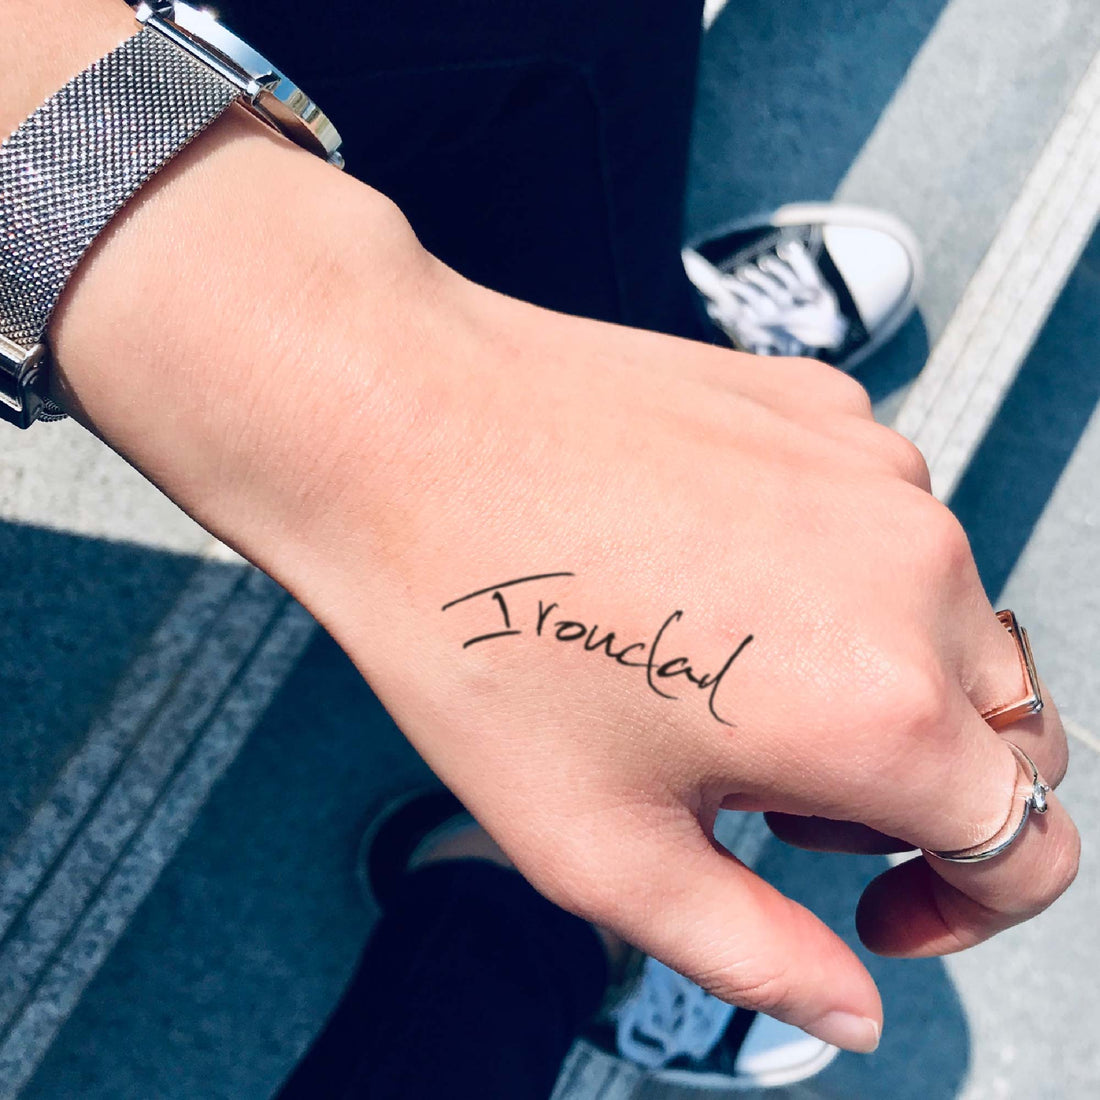 Ironclad custom temporary tattoo sticker design idea inspiration meanings removal arm wrist hand words font name signature calligraphy lyrics tour concert outfits merch accessory gift souvenir costumes wear dress up code